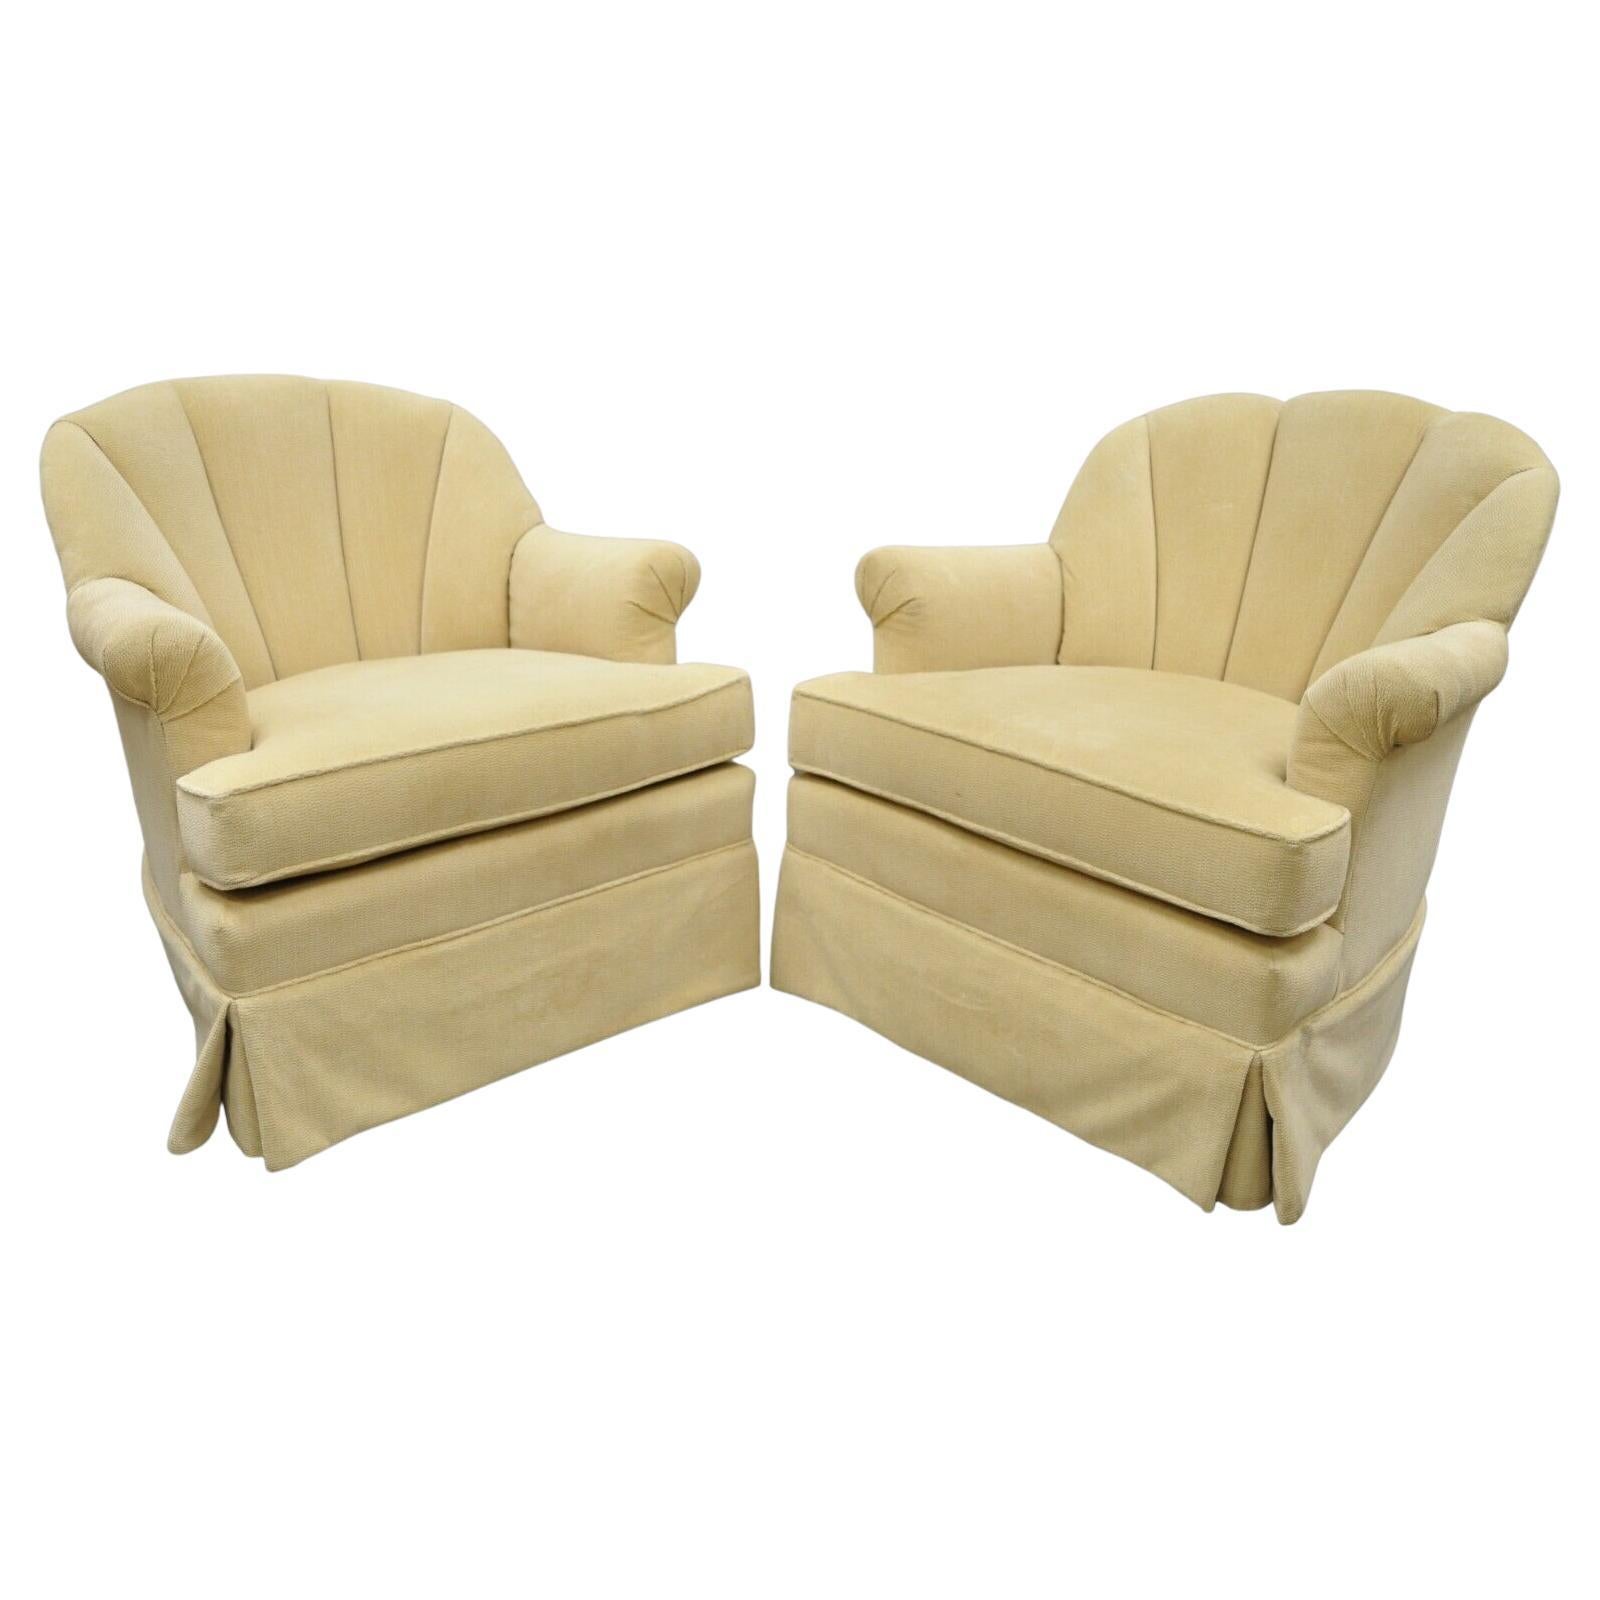 Pembrook Mid Century Beige Swivel Channel Back Club Lounge Chairs - a Pair